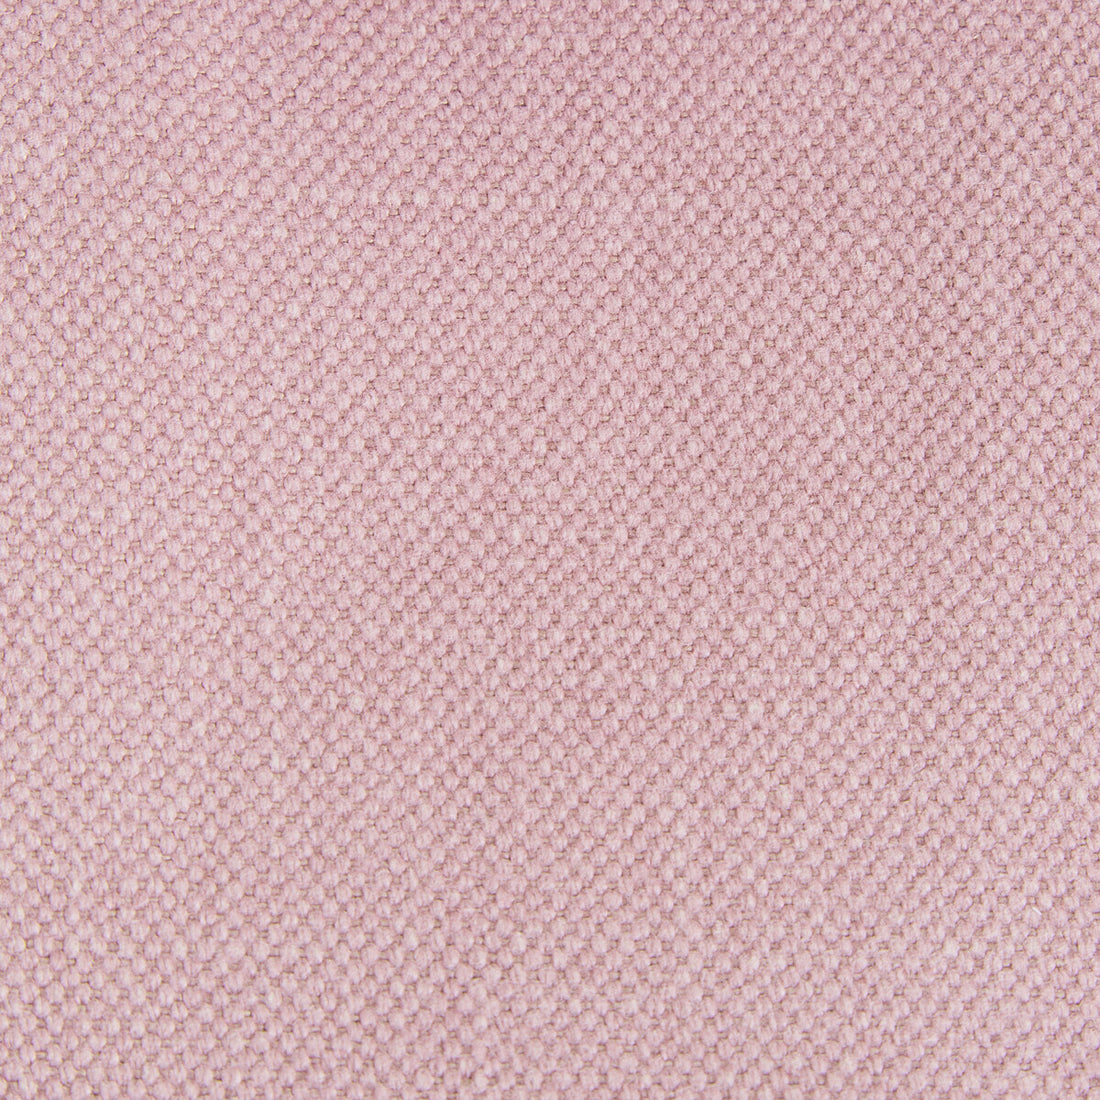 Lima fabric in rosa color - pattern GDT5616.018.0 - by Gaston y Daniela in the Gaston Nuevo Mundo collection